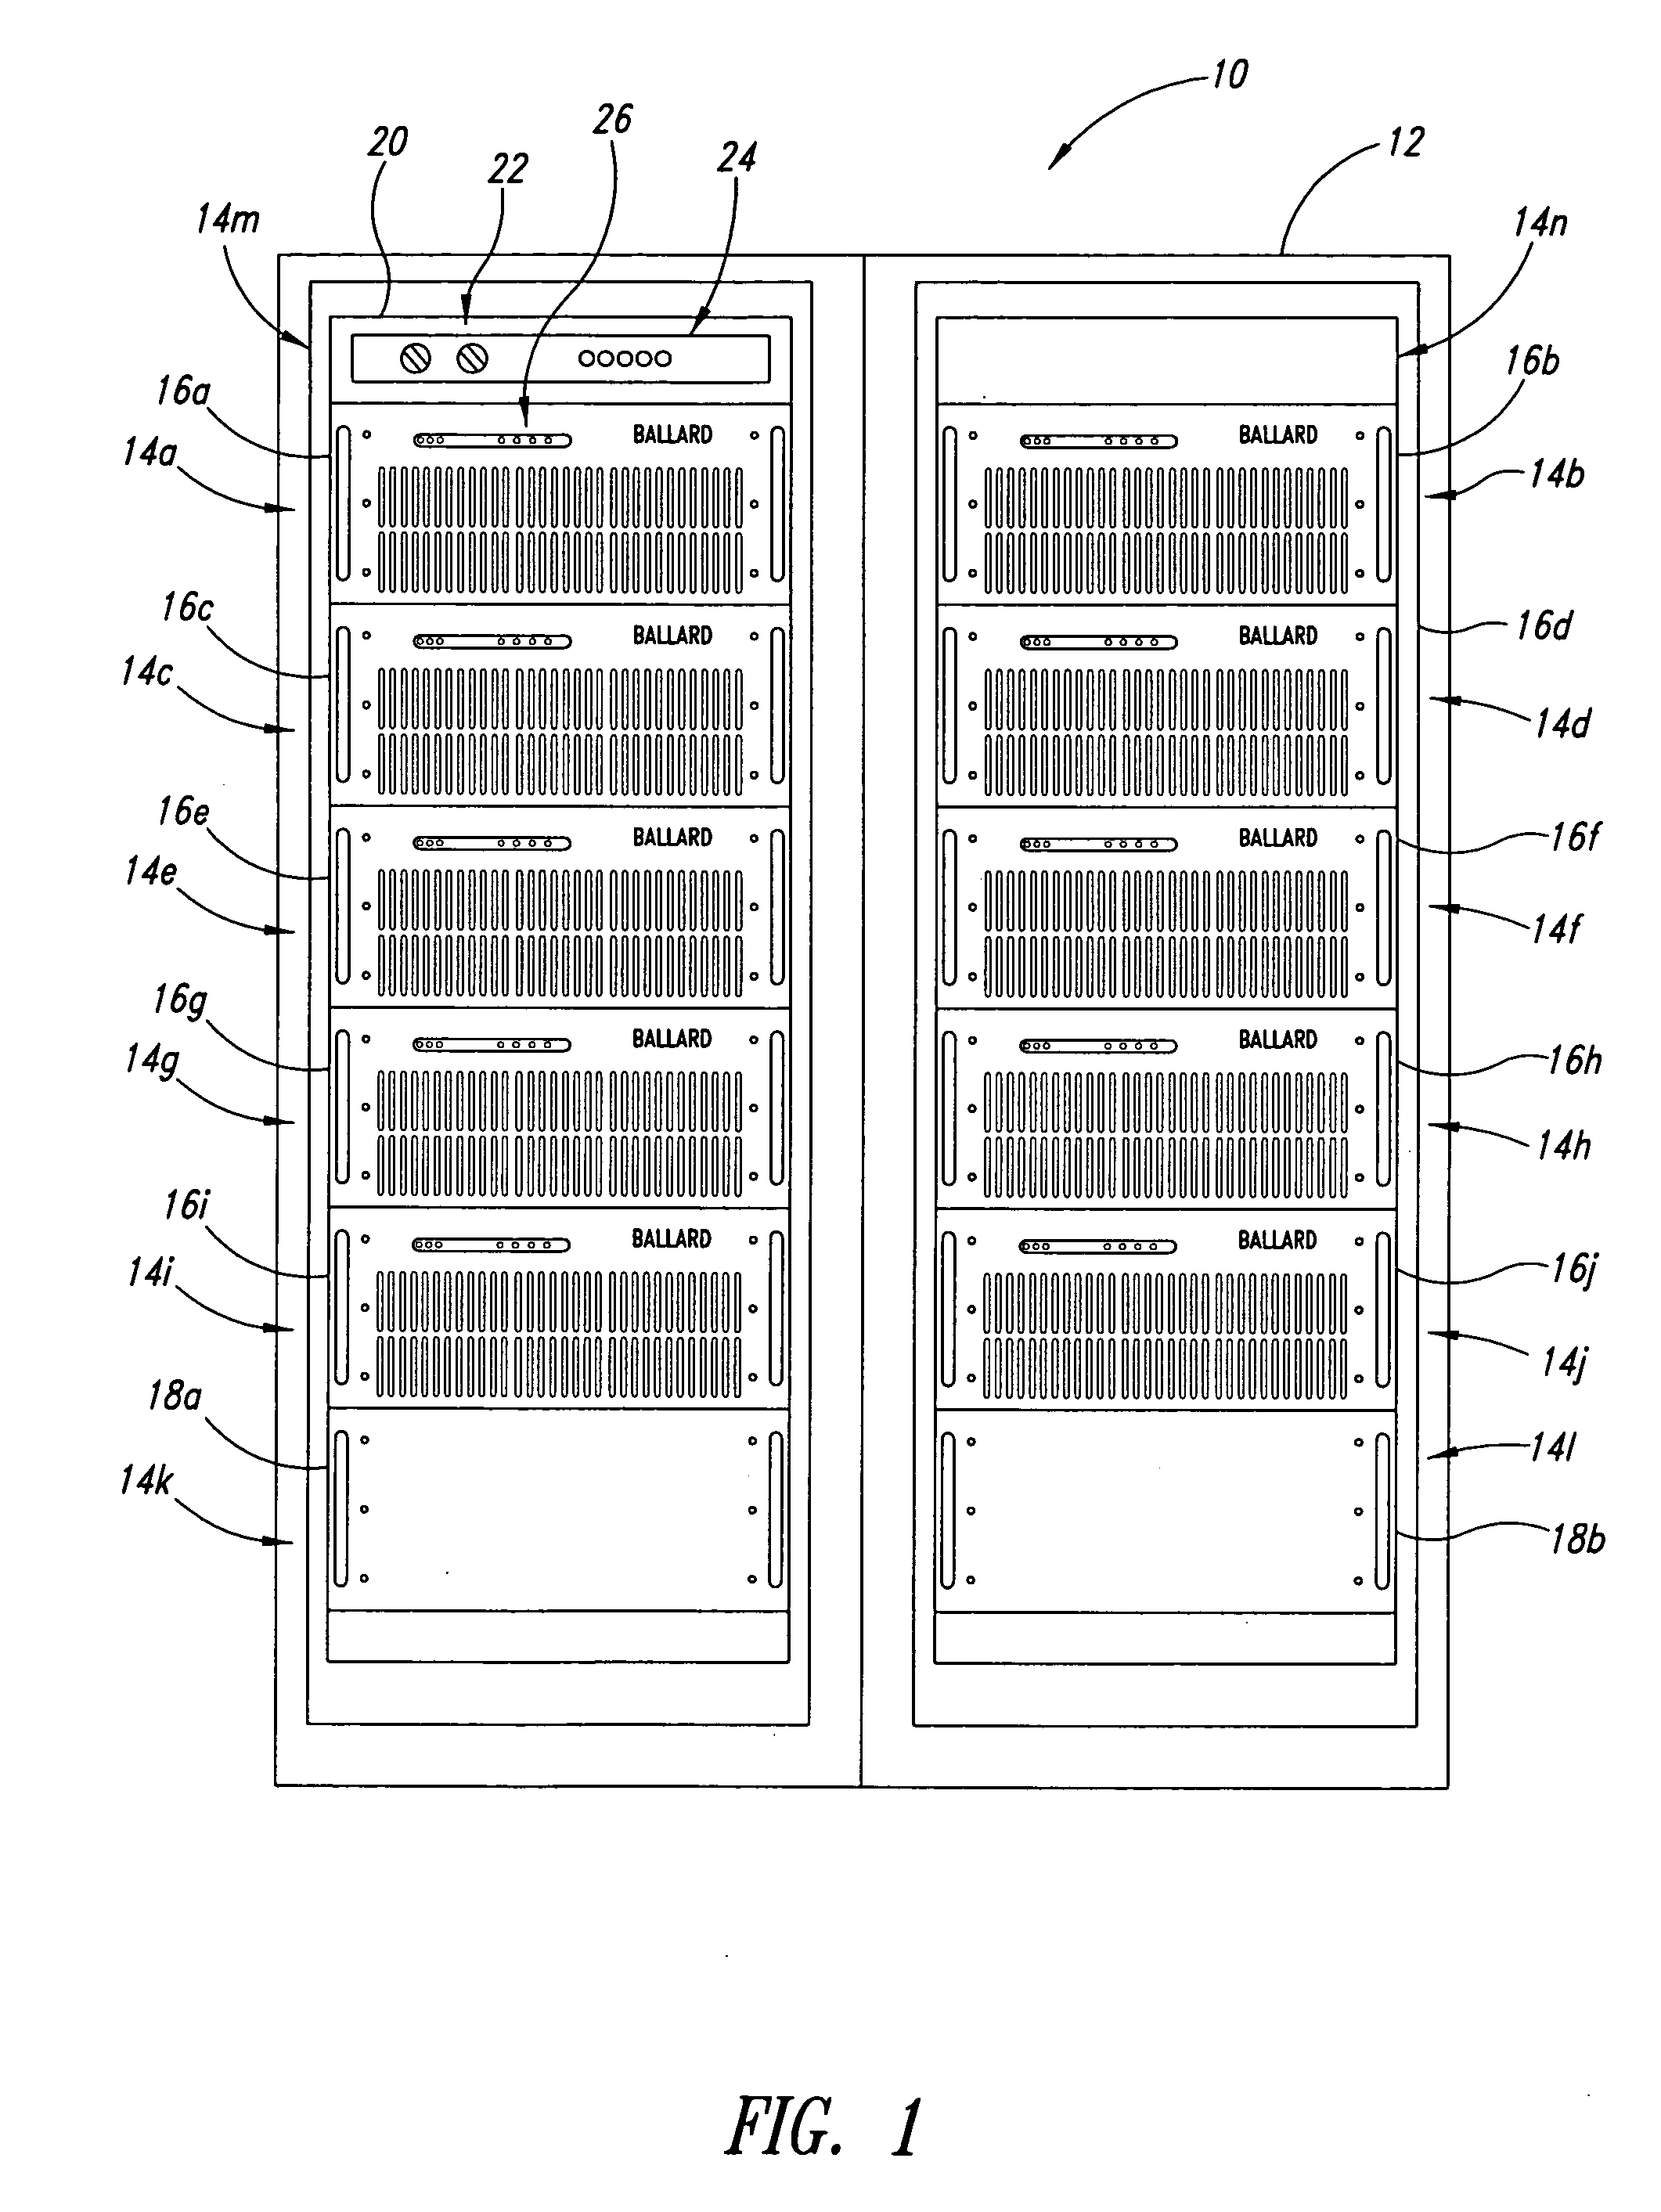 Apparatus and method for hybrid power module systems